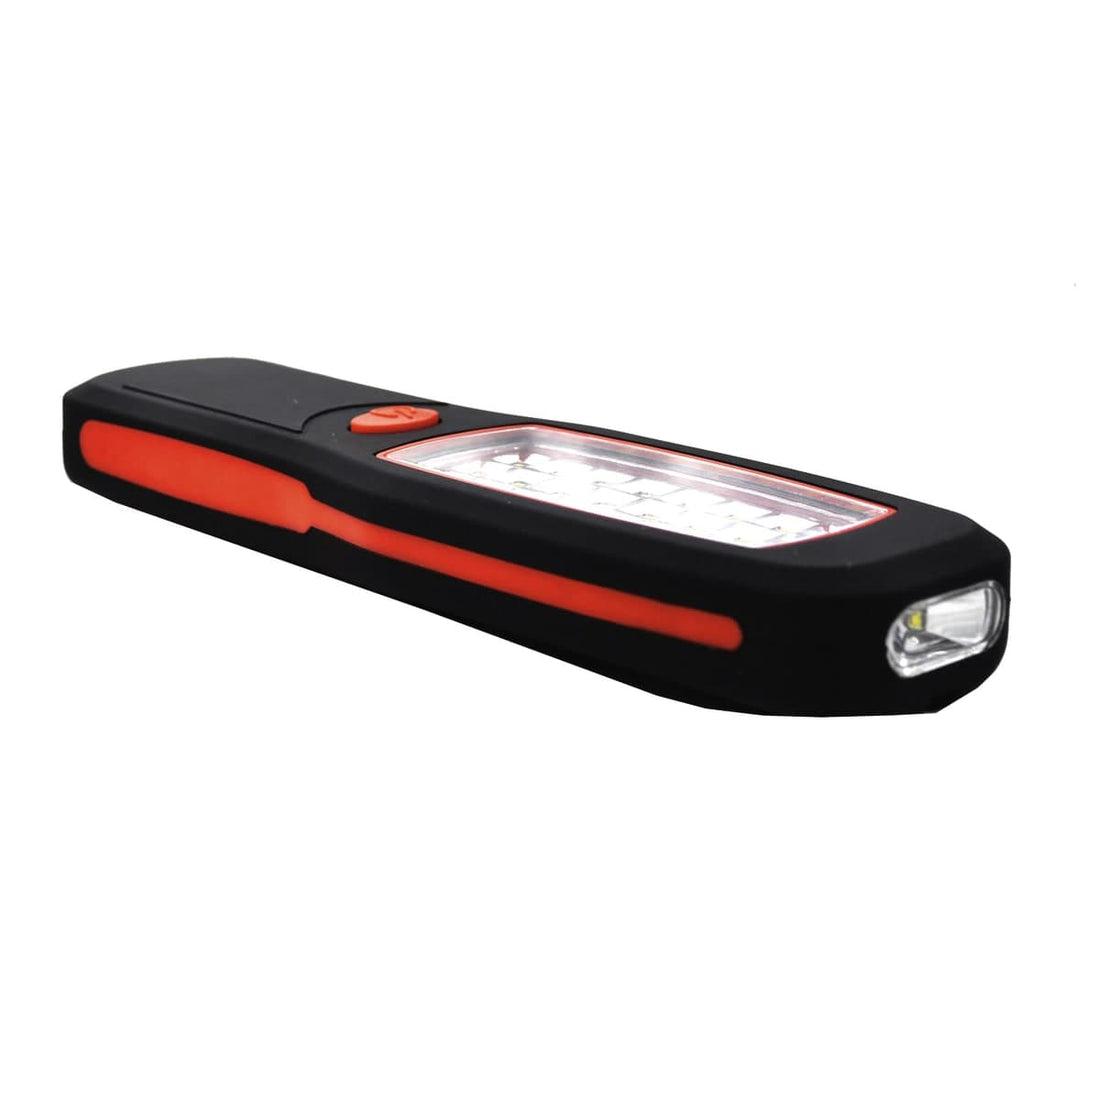 BATTERY-OPERATED LED TORCH WITH HOOK AND SIDE MAGNET LEXMAN - best price from Maltashopper.com BR420000033